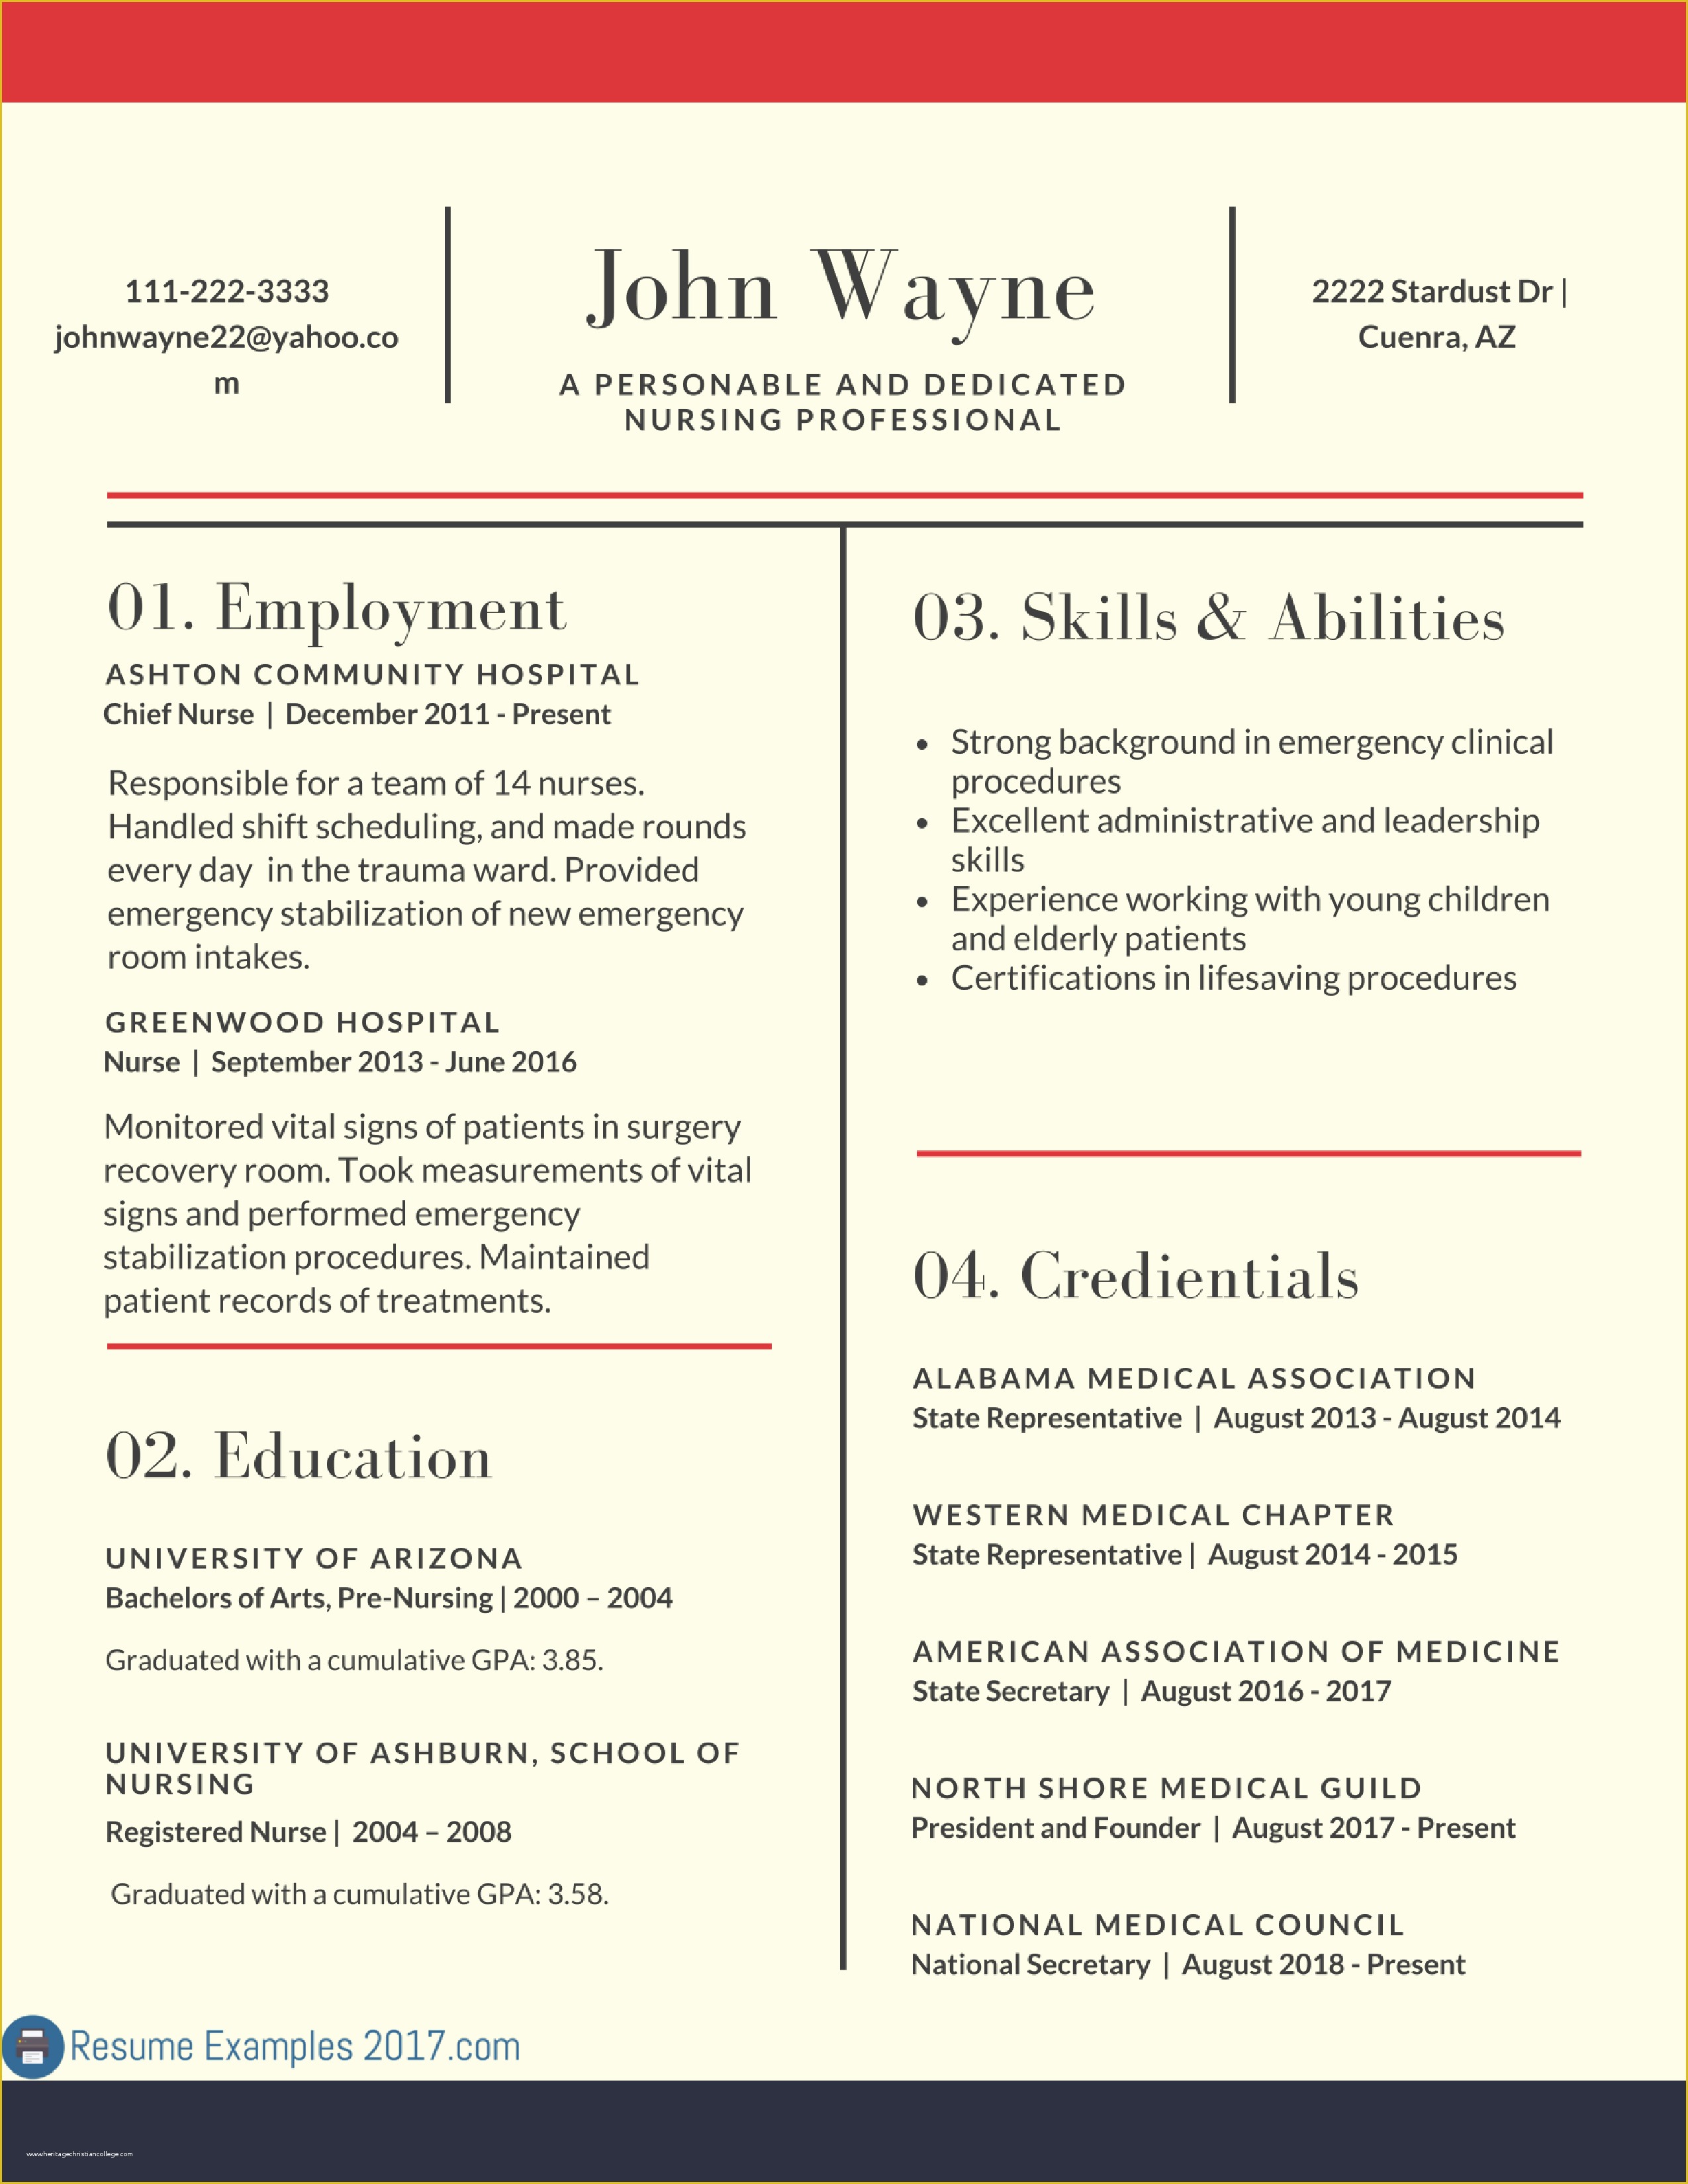 resume template download free 2017